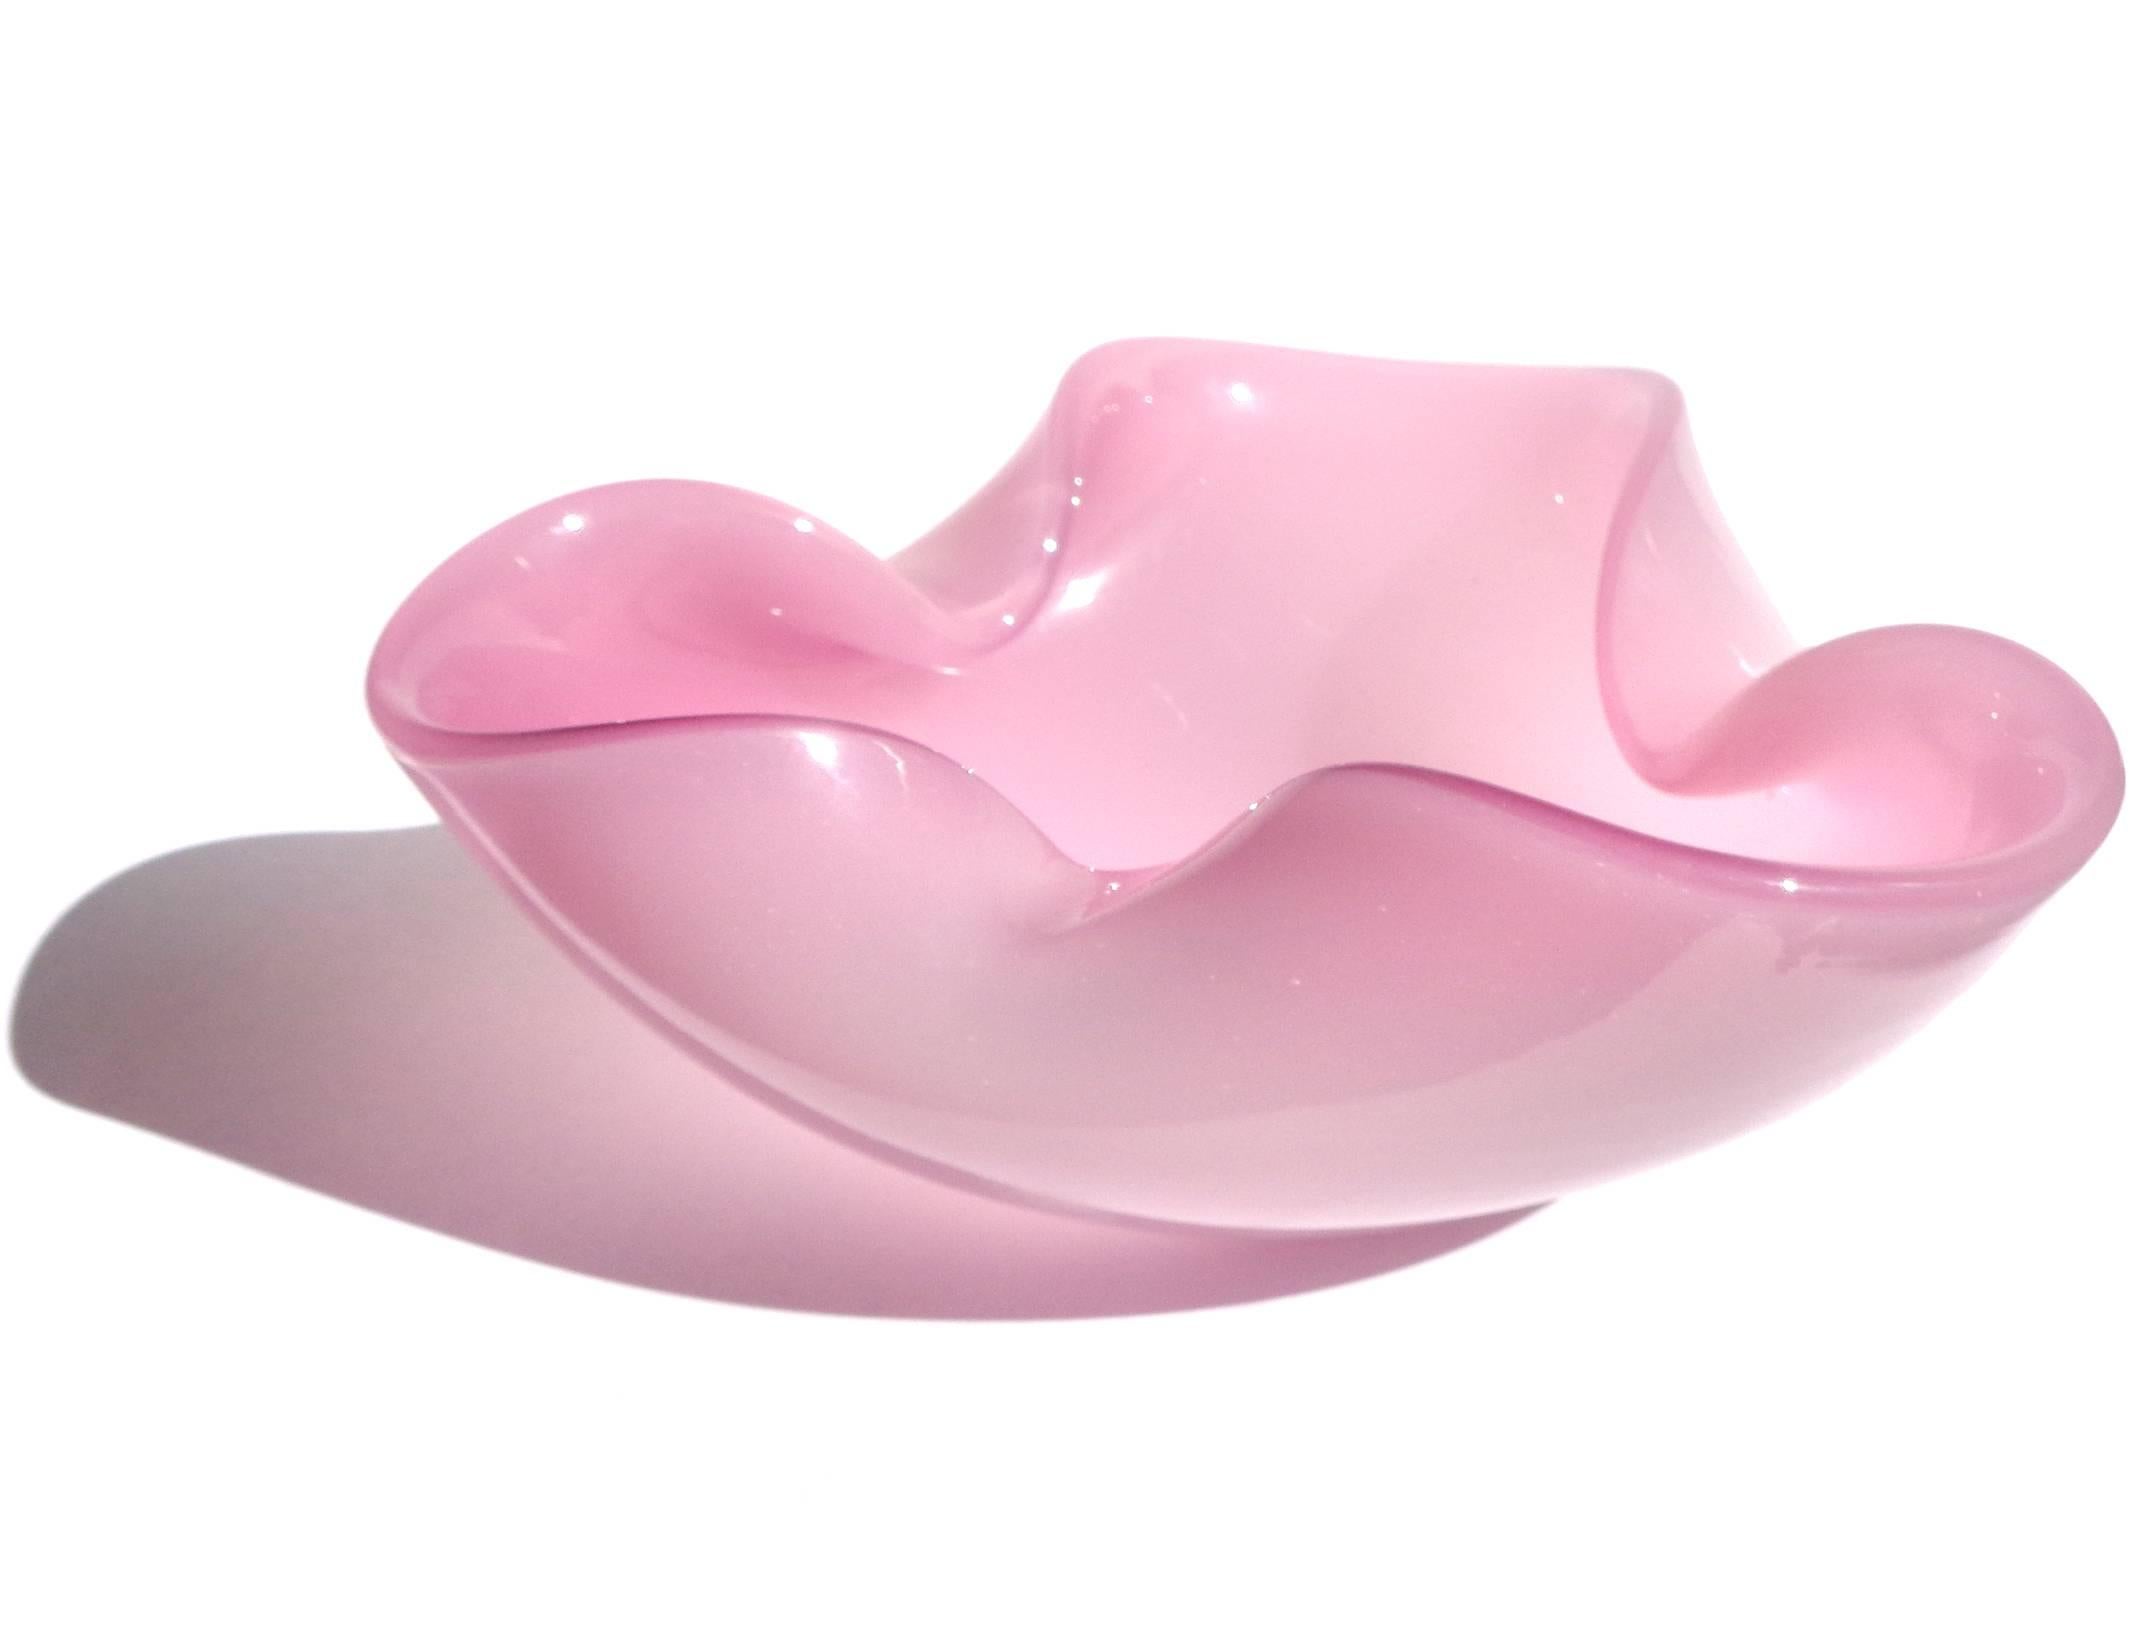 Beautiful large vintage Murano hand blown opalescent pink Italian art glass folded rim bowl. Attributed to designer Archimede Seguso, in the 